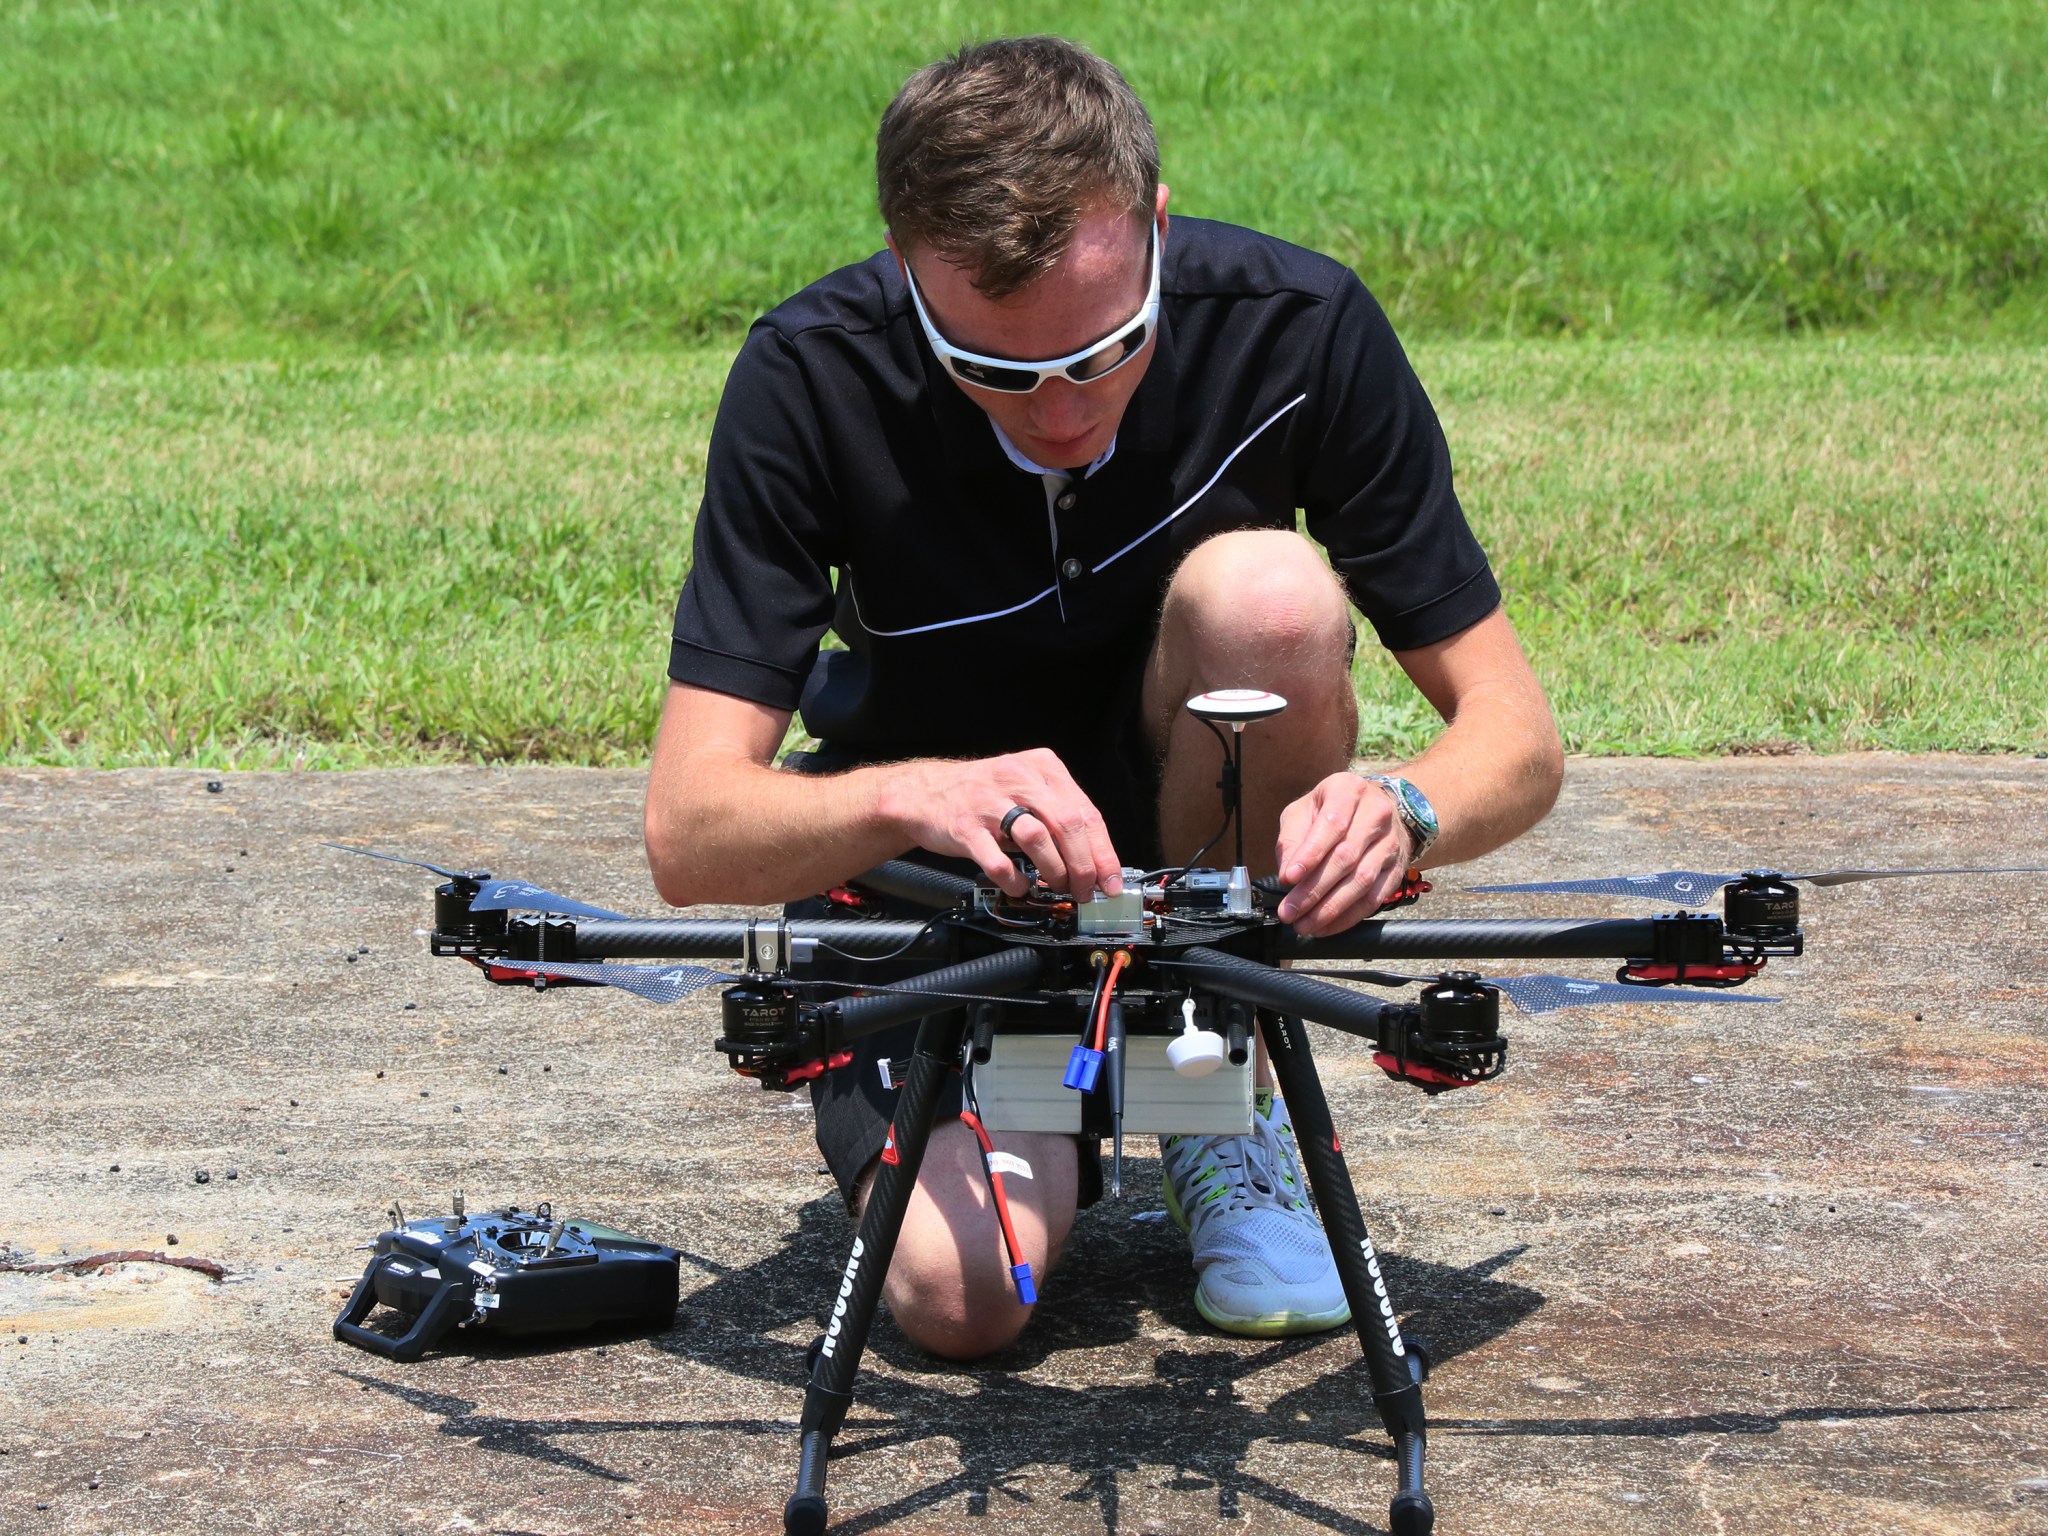 A pilot goes through a checklist before flying an unmanned aircraft system at NASA Langley.